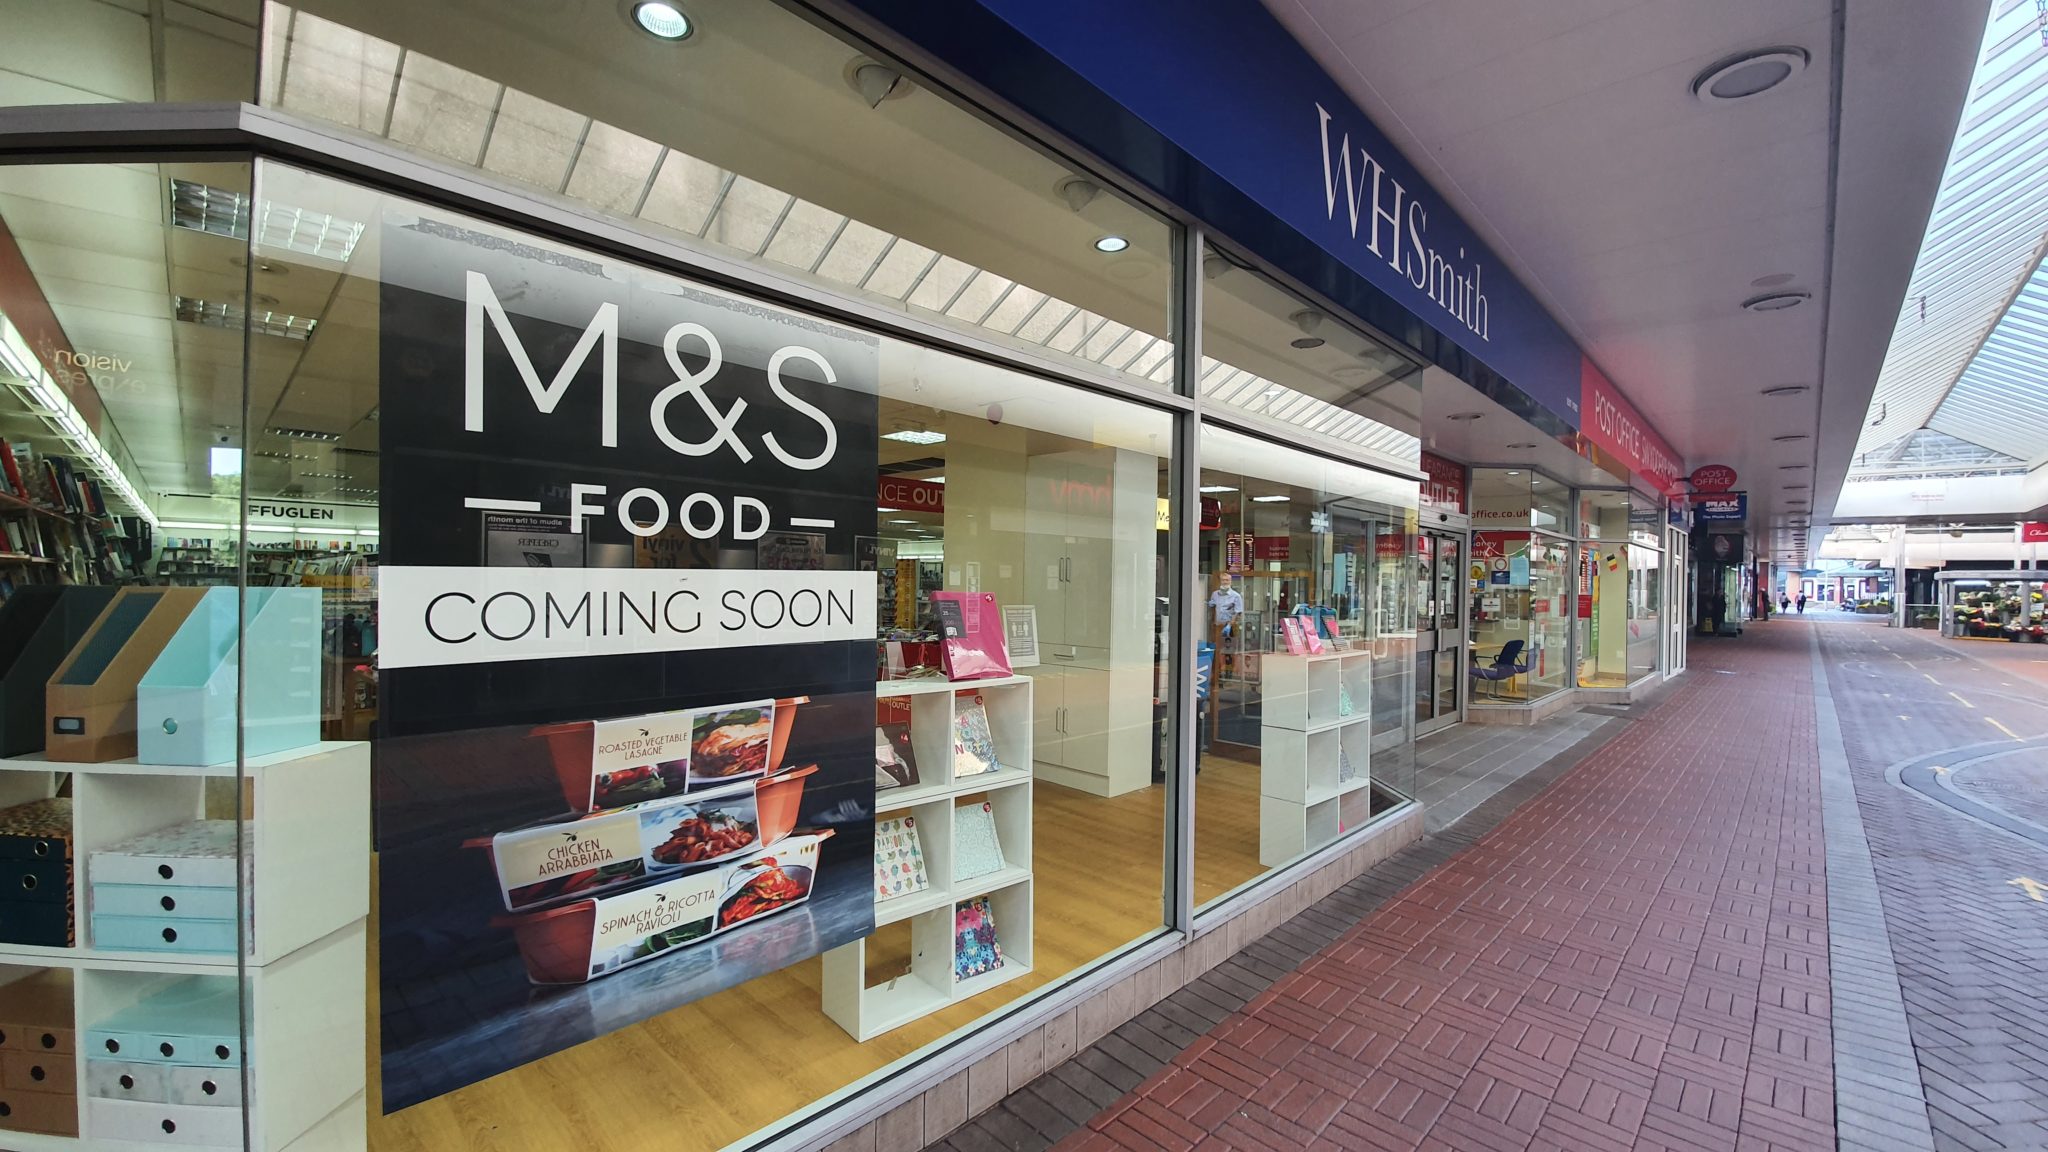 A poster in the window of WMSmiths to announce a M&S Food Hall is coming to Cwmbran